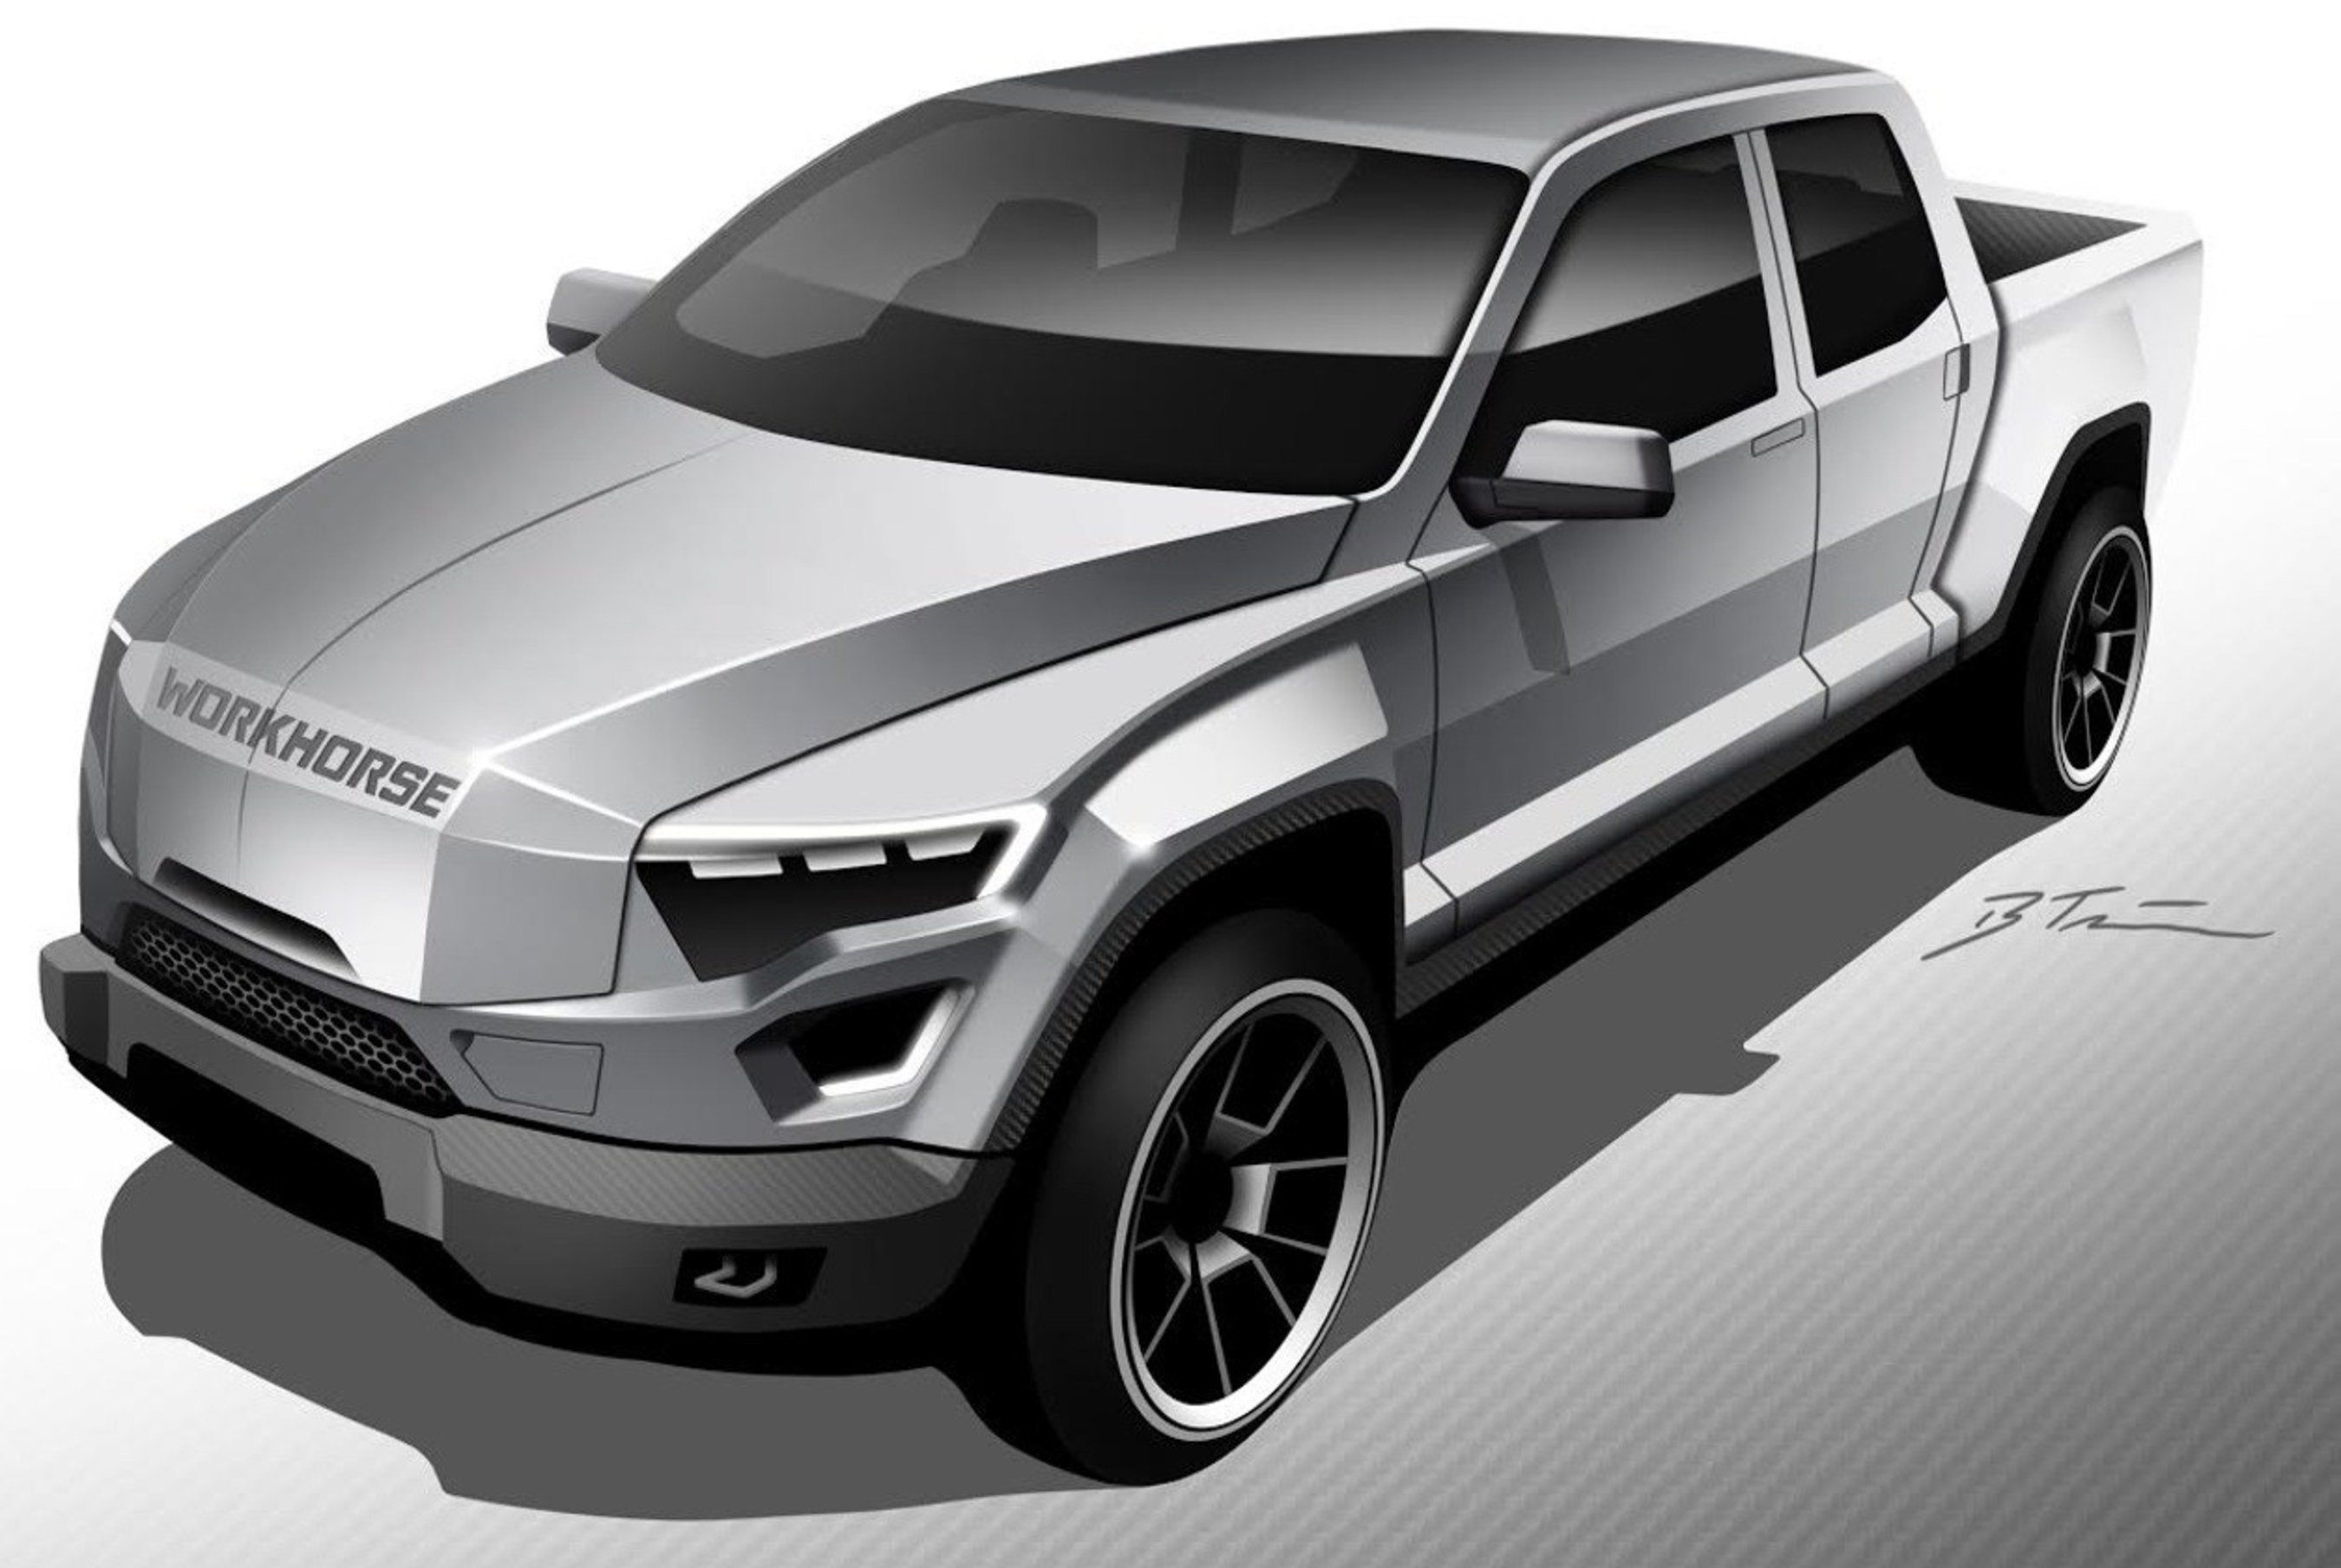 Workhorse W-15 Electric Pickup Truck with Extended Range